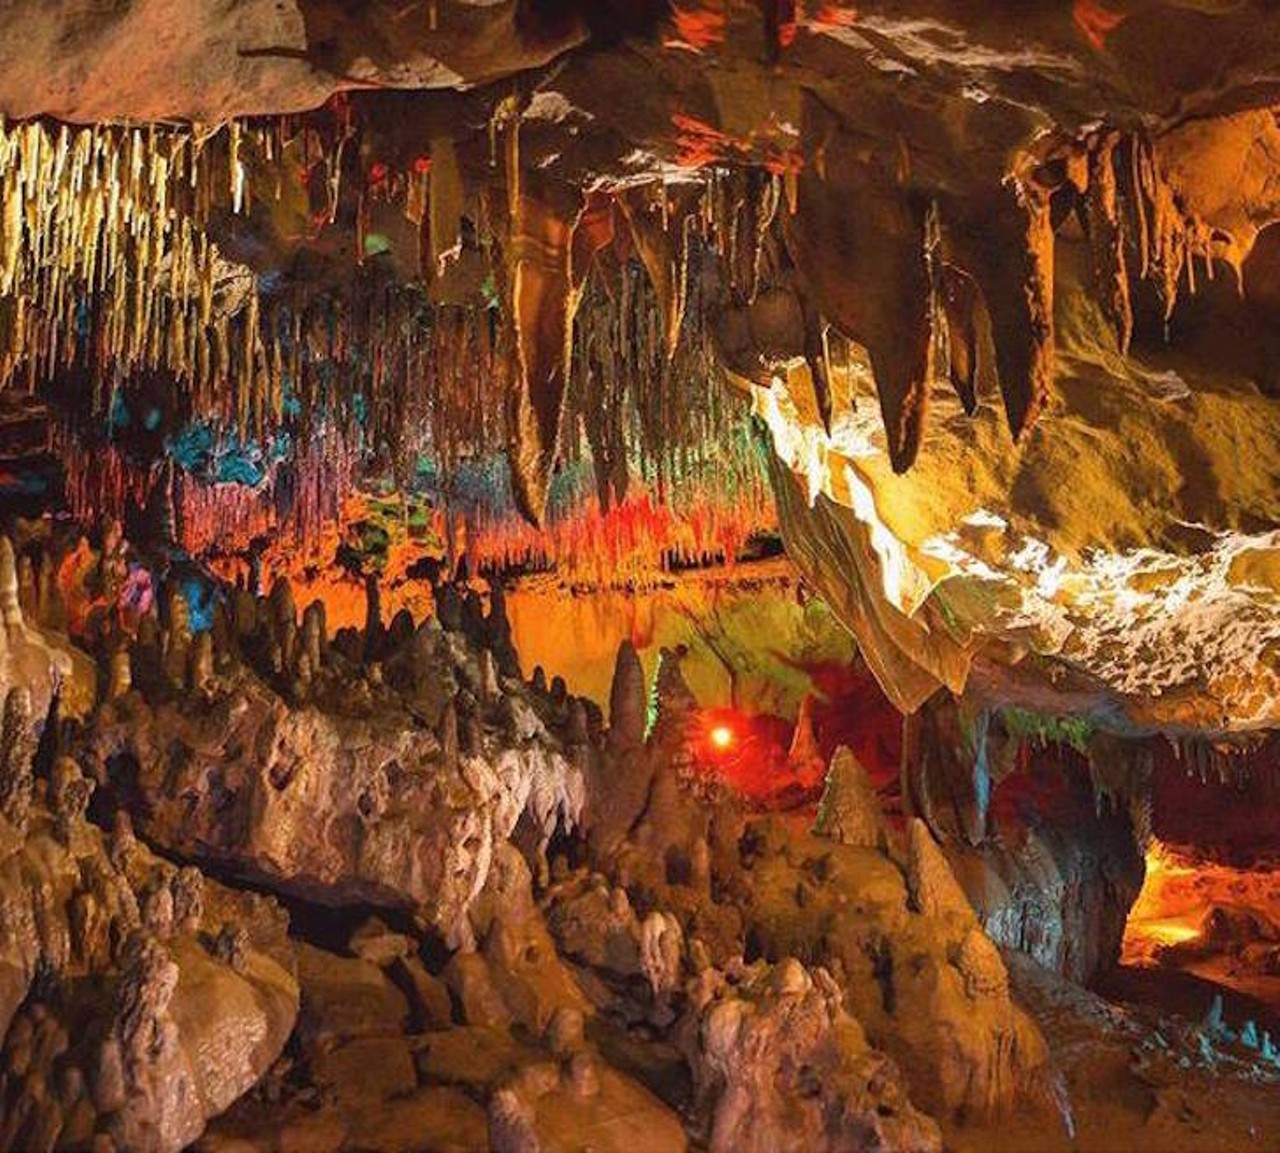 Florida Caverns Tour
3345 Caverns Road, Marianna | 850-482-1228
Take this 45-minute tour and witness dazzling formations of limestone in one of the few dry caves in a state park. Tours are $5 for children and $8 for adults.
Photo via Visit Tallahassee/Facebook